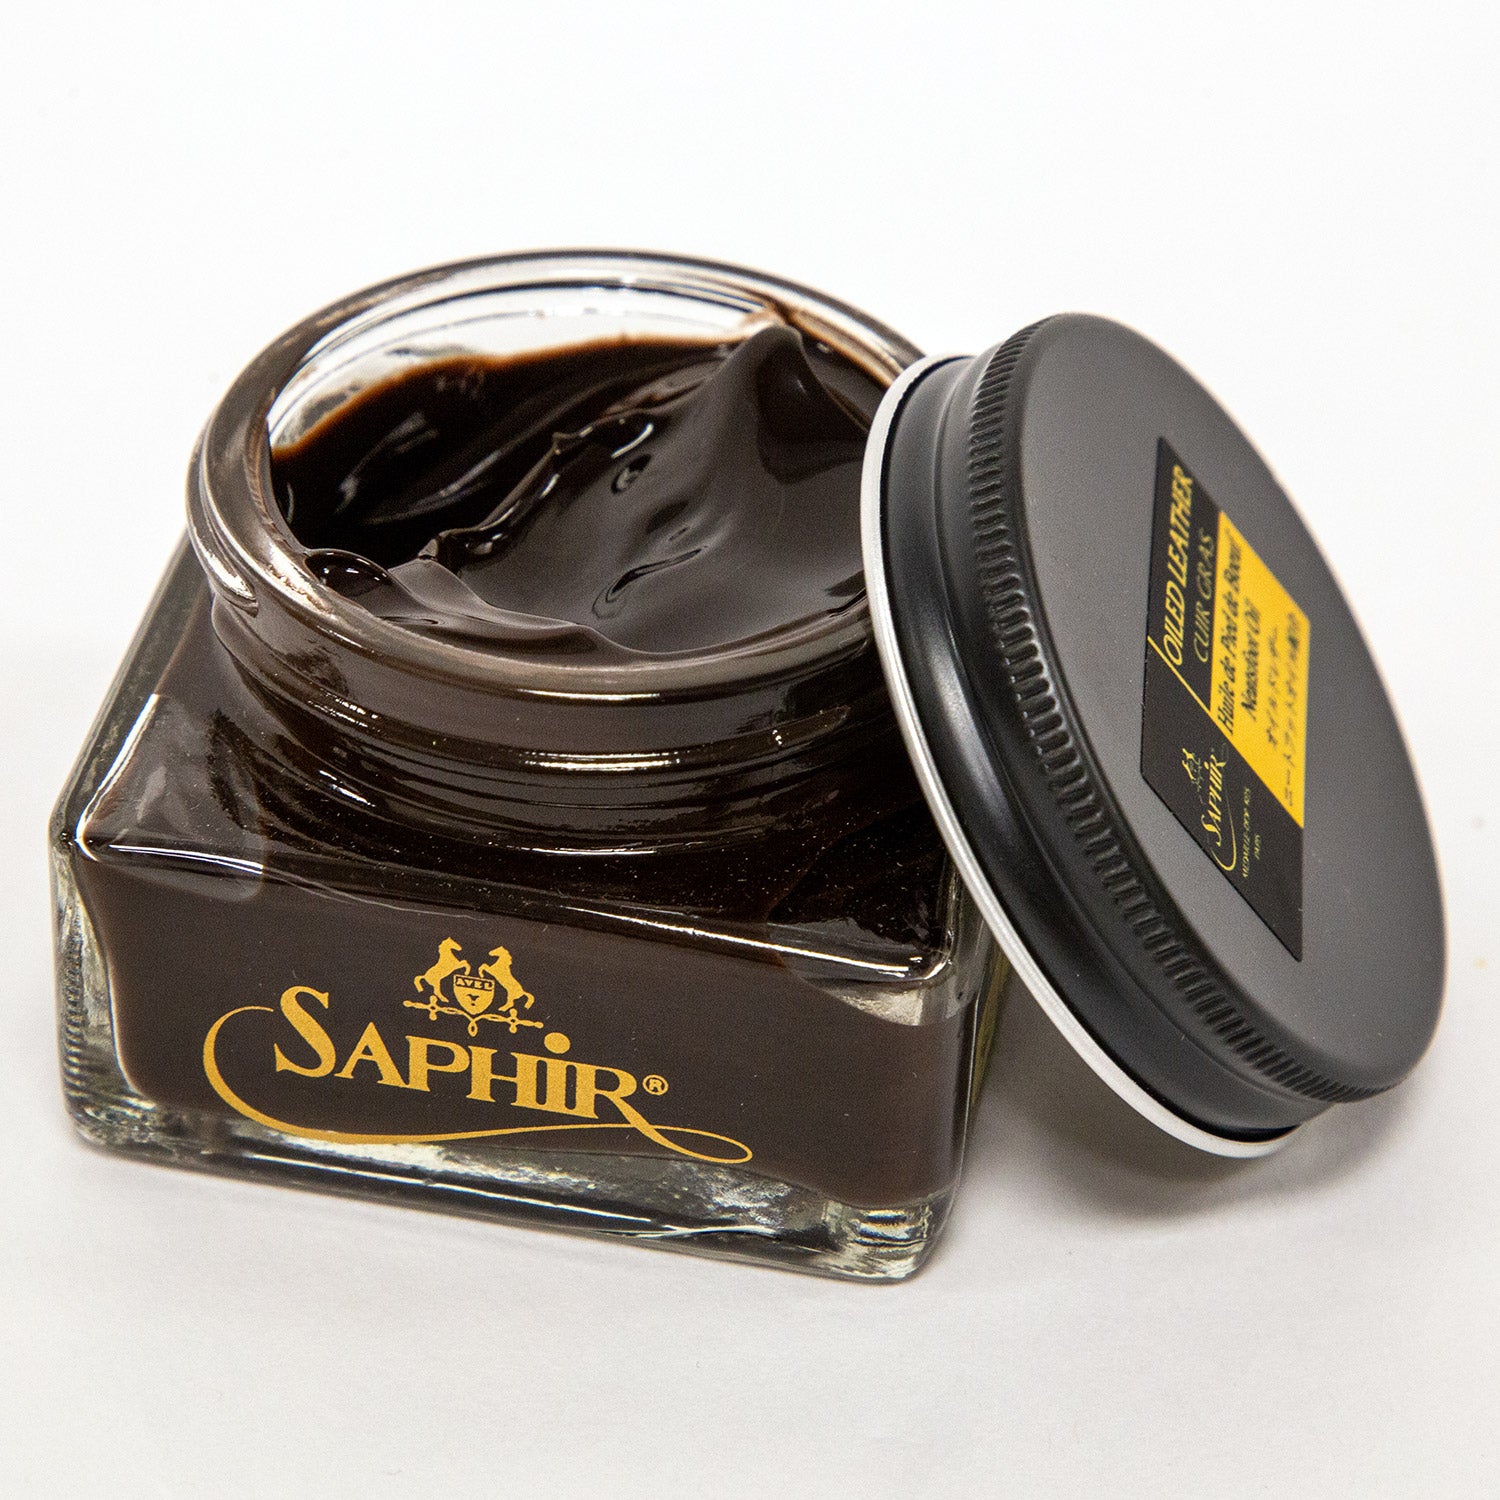 Saphir Medaille D’or Oiled Leather Cream with Neatsfoot Oil for Nourishing and Water Repellence - Dark Brown